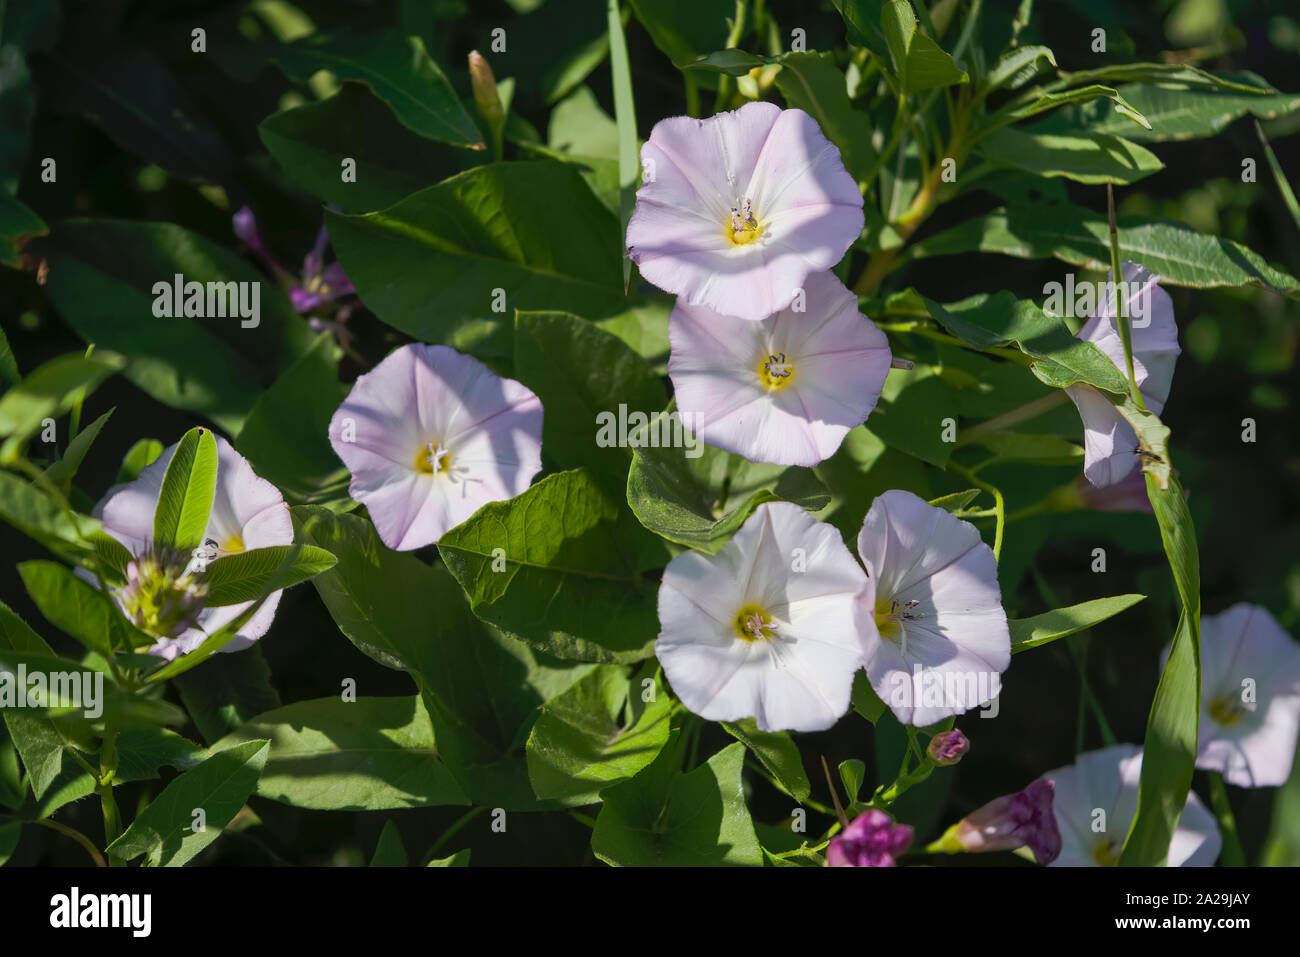 Pink blossoming field bindweed flowers. Field loach, Latin name Convolvulus arvensis to the meadow. Stock Photo